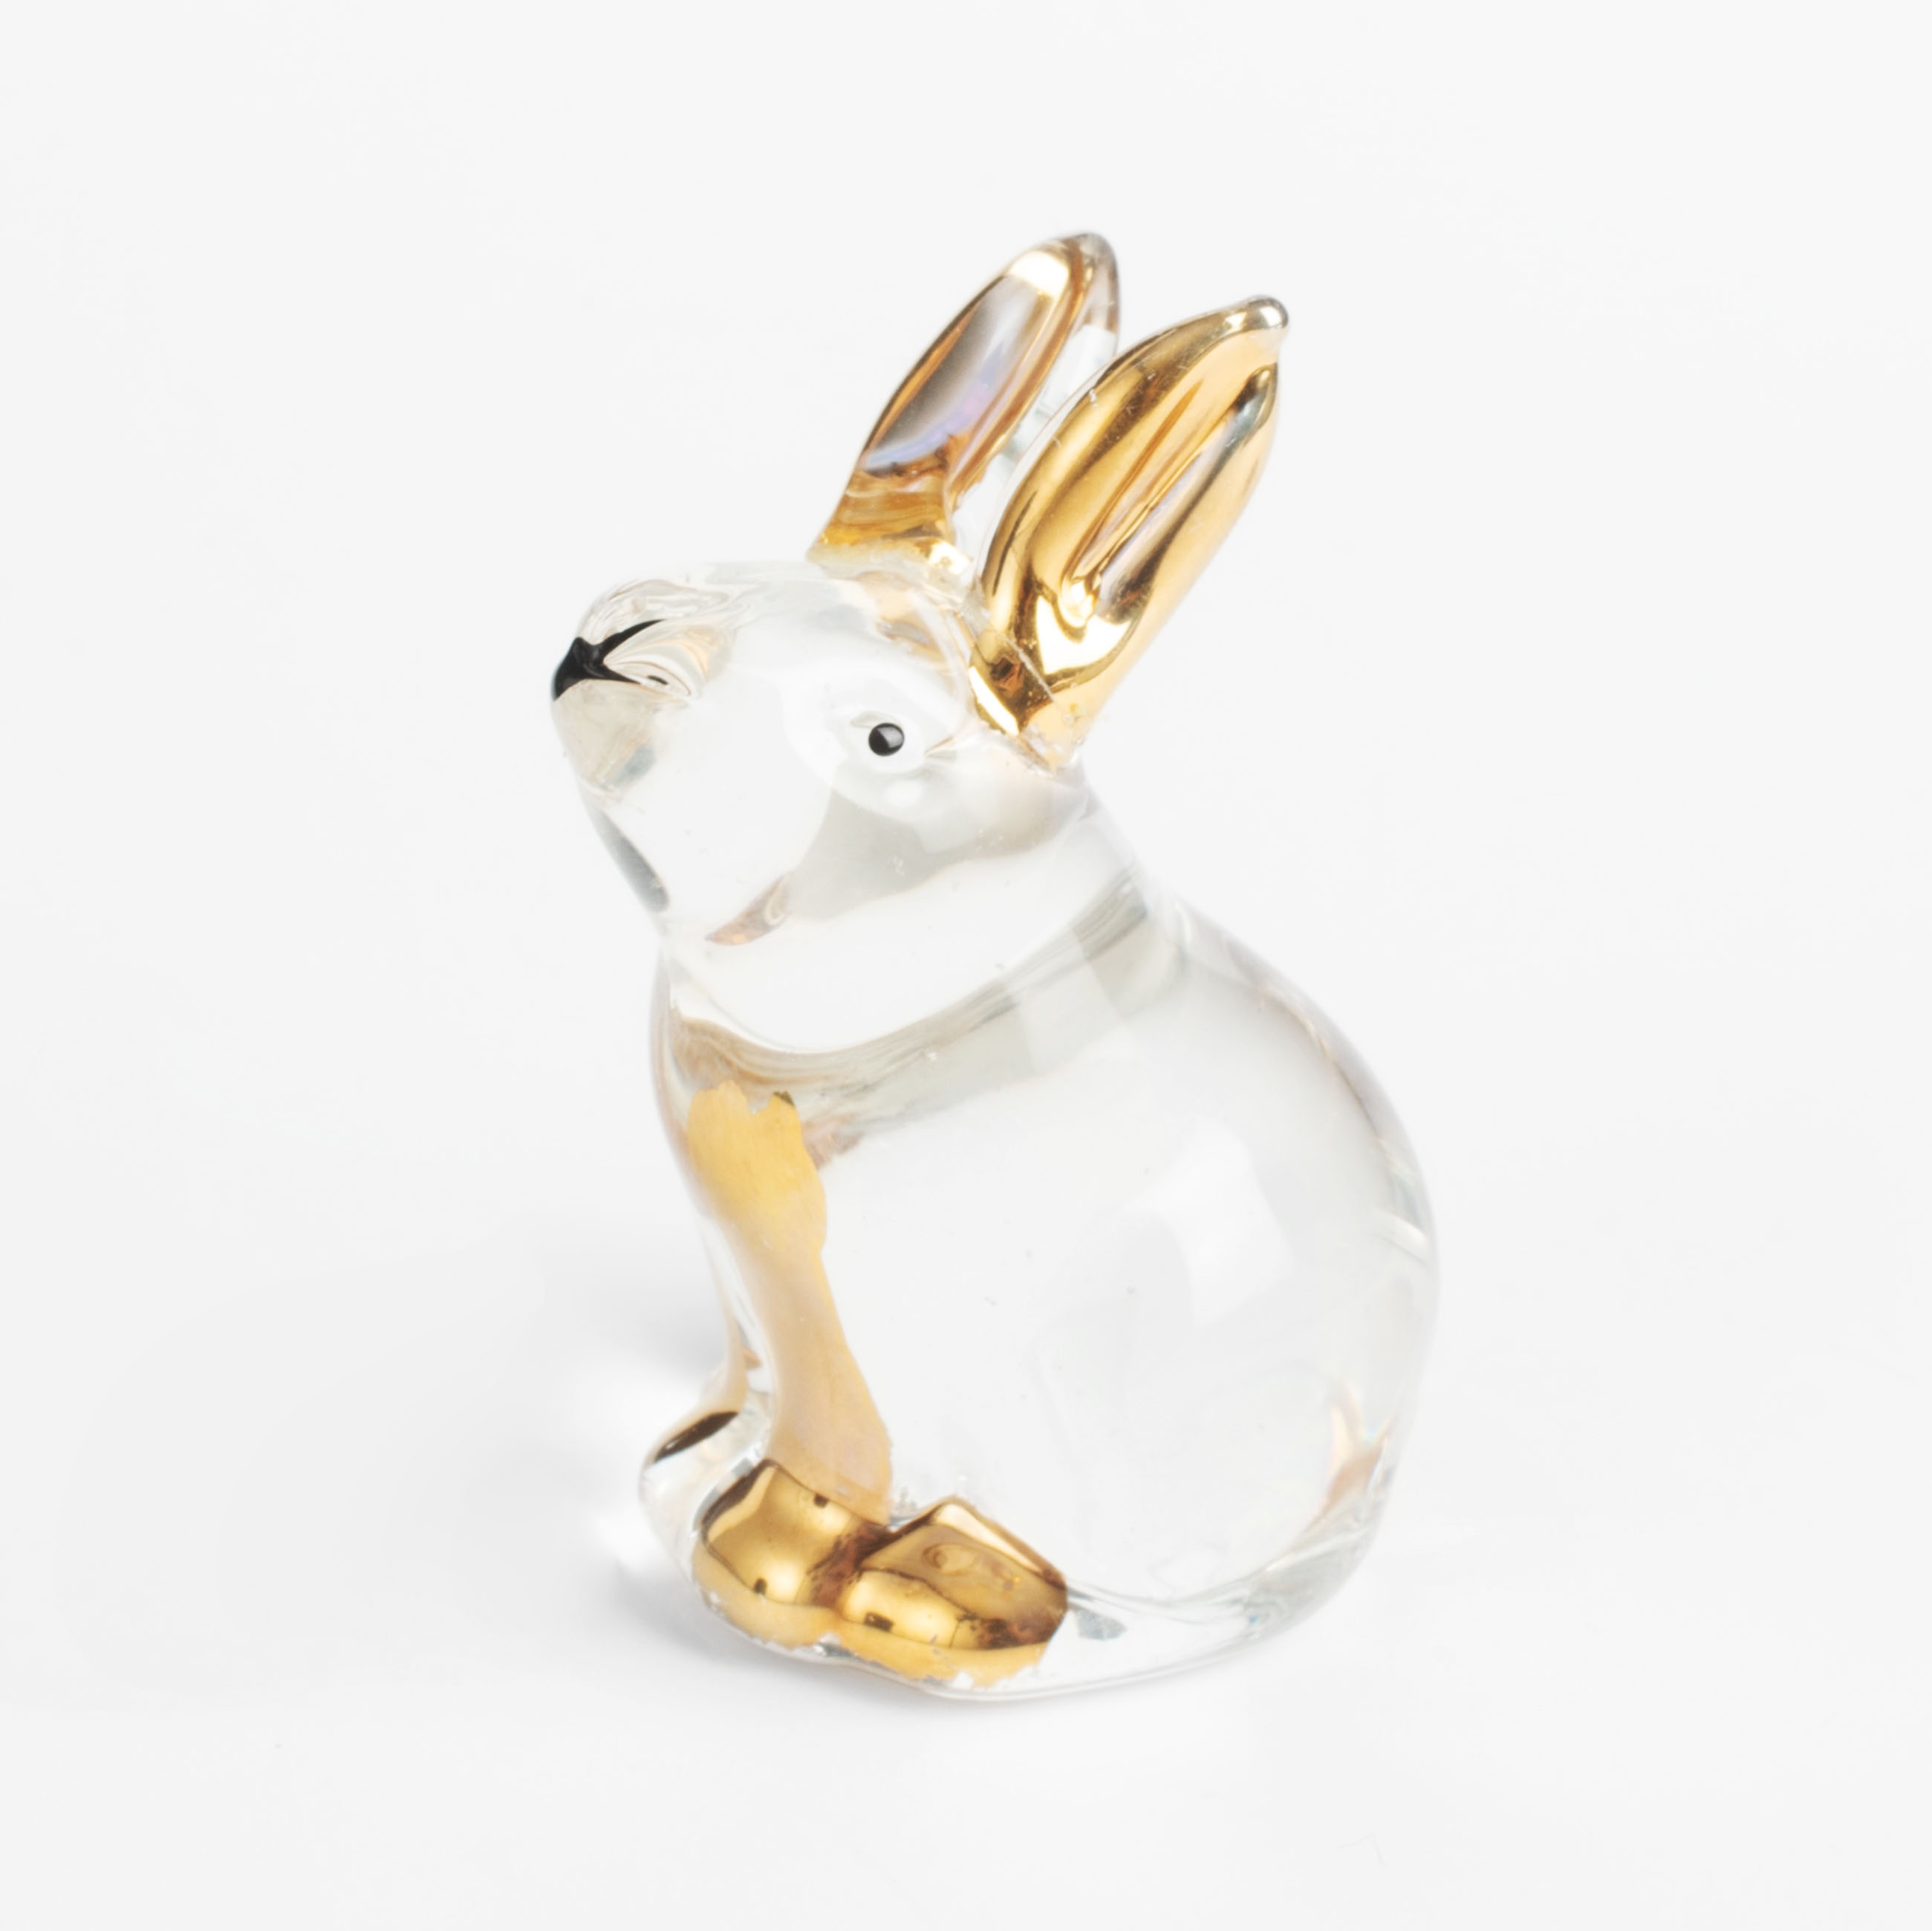 Statuette, 6 cm, glass, Rabbit with golden ears and paws, Vitreous изображение № 4